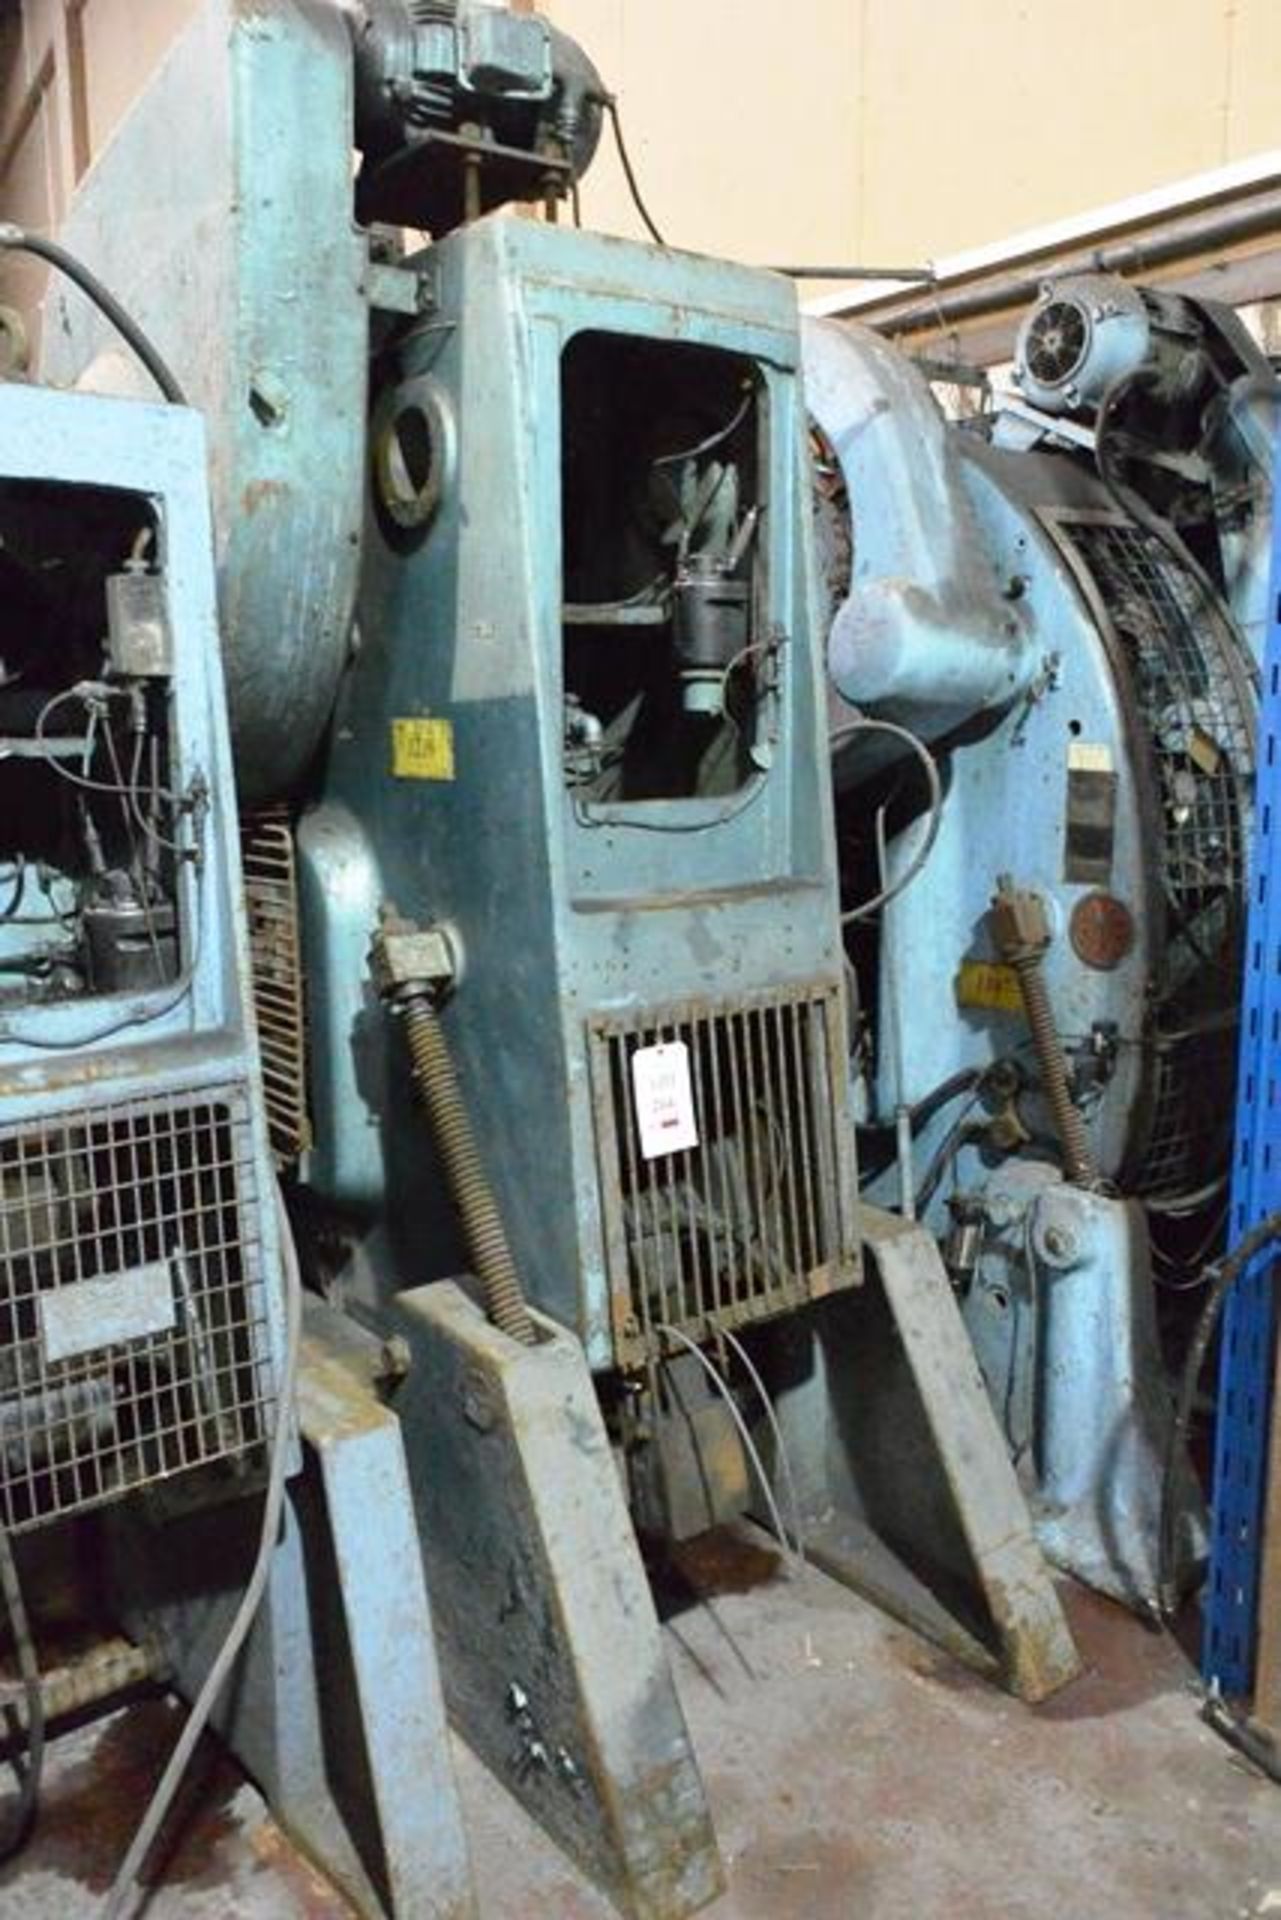 HME G55 ton inclinable mechanical power press, serial no: 15687, with Wander foot control (working